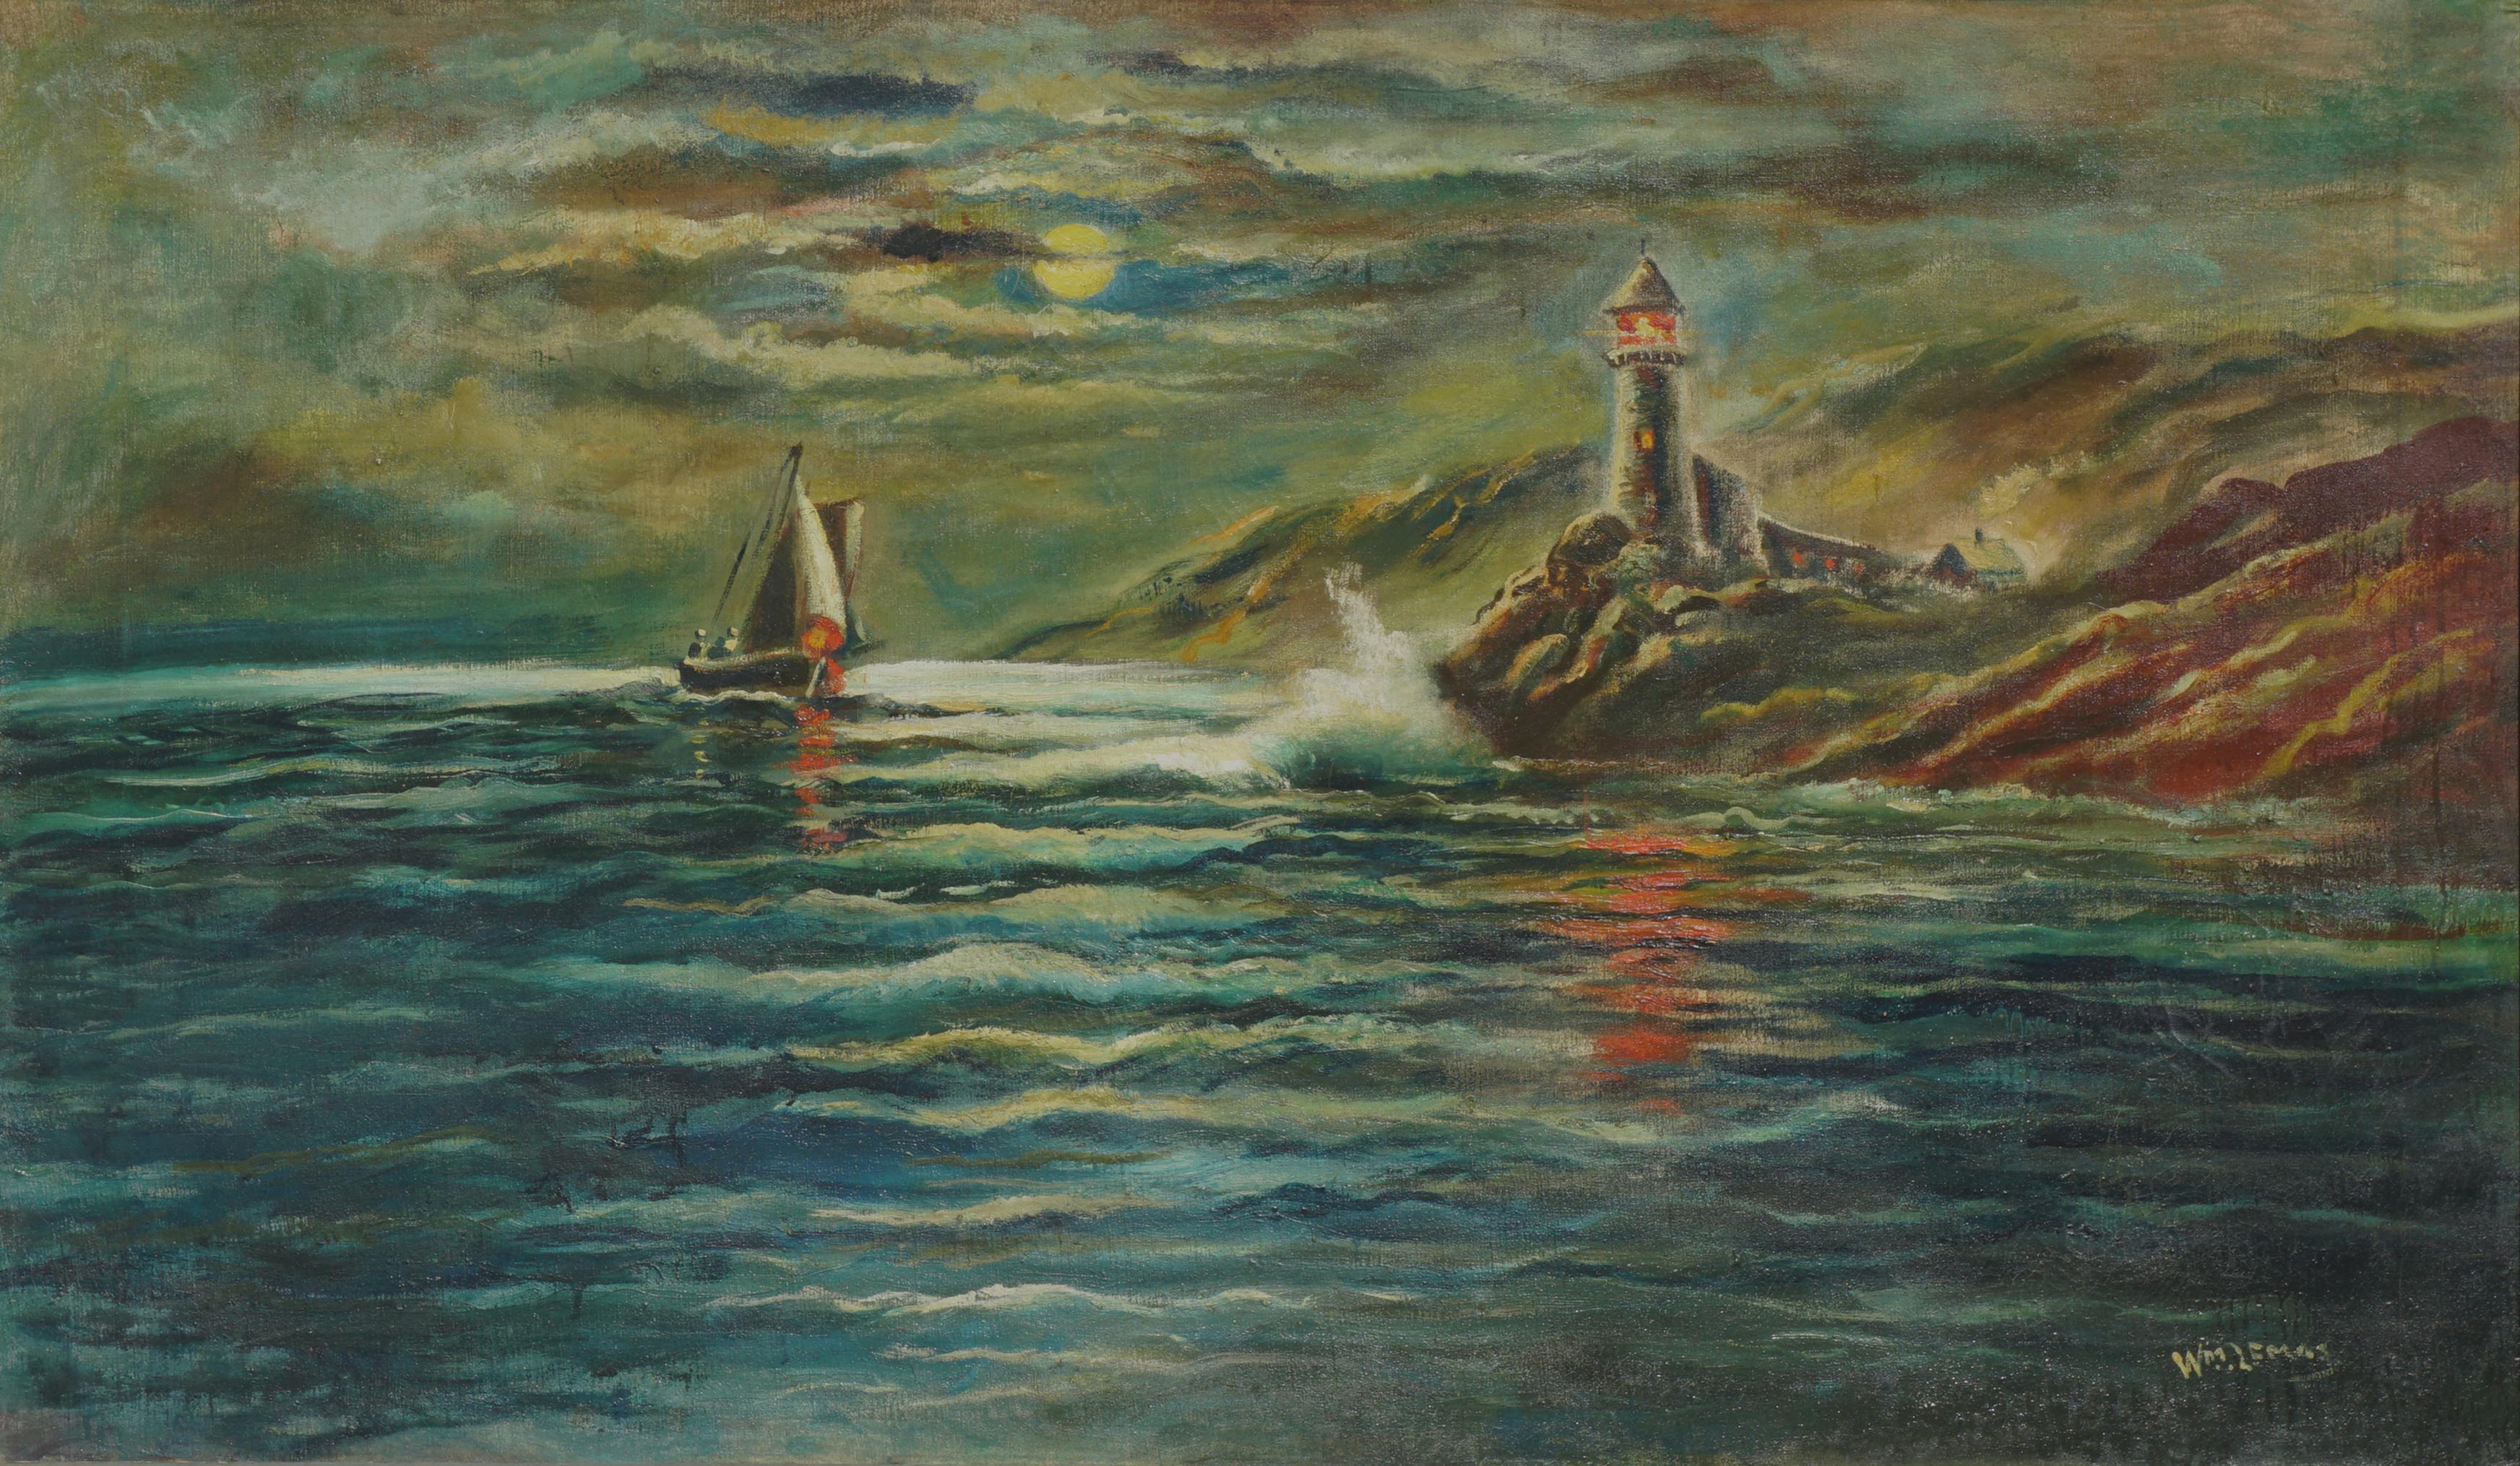 Nocturnal Pigeon Point Lighthouse - Painting by William M. Lemos